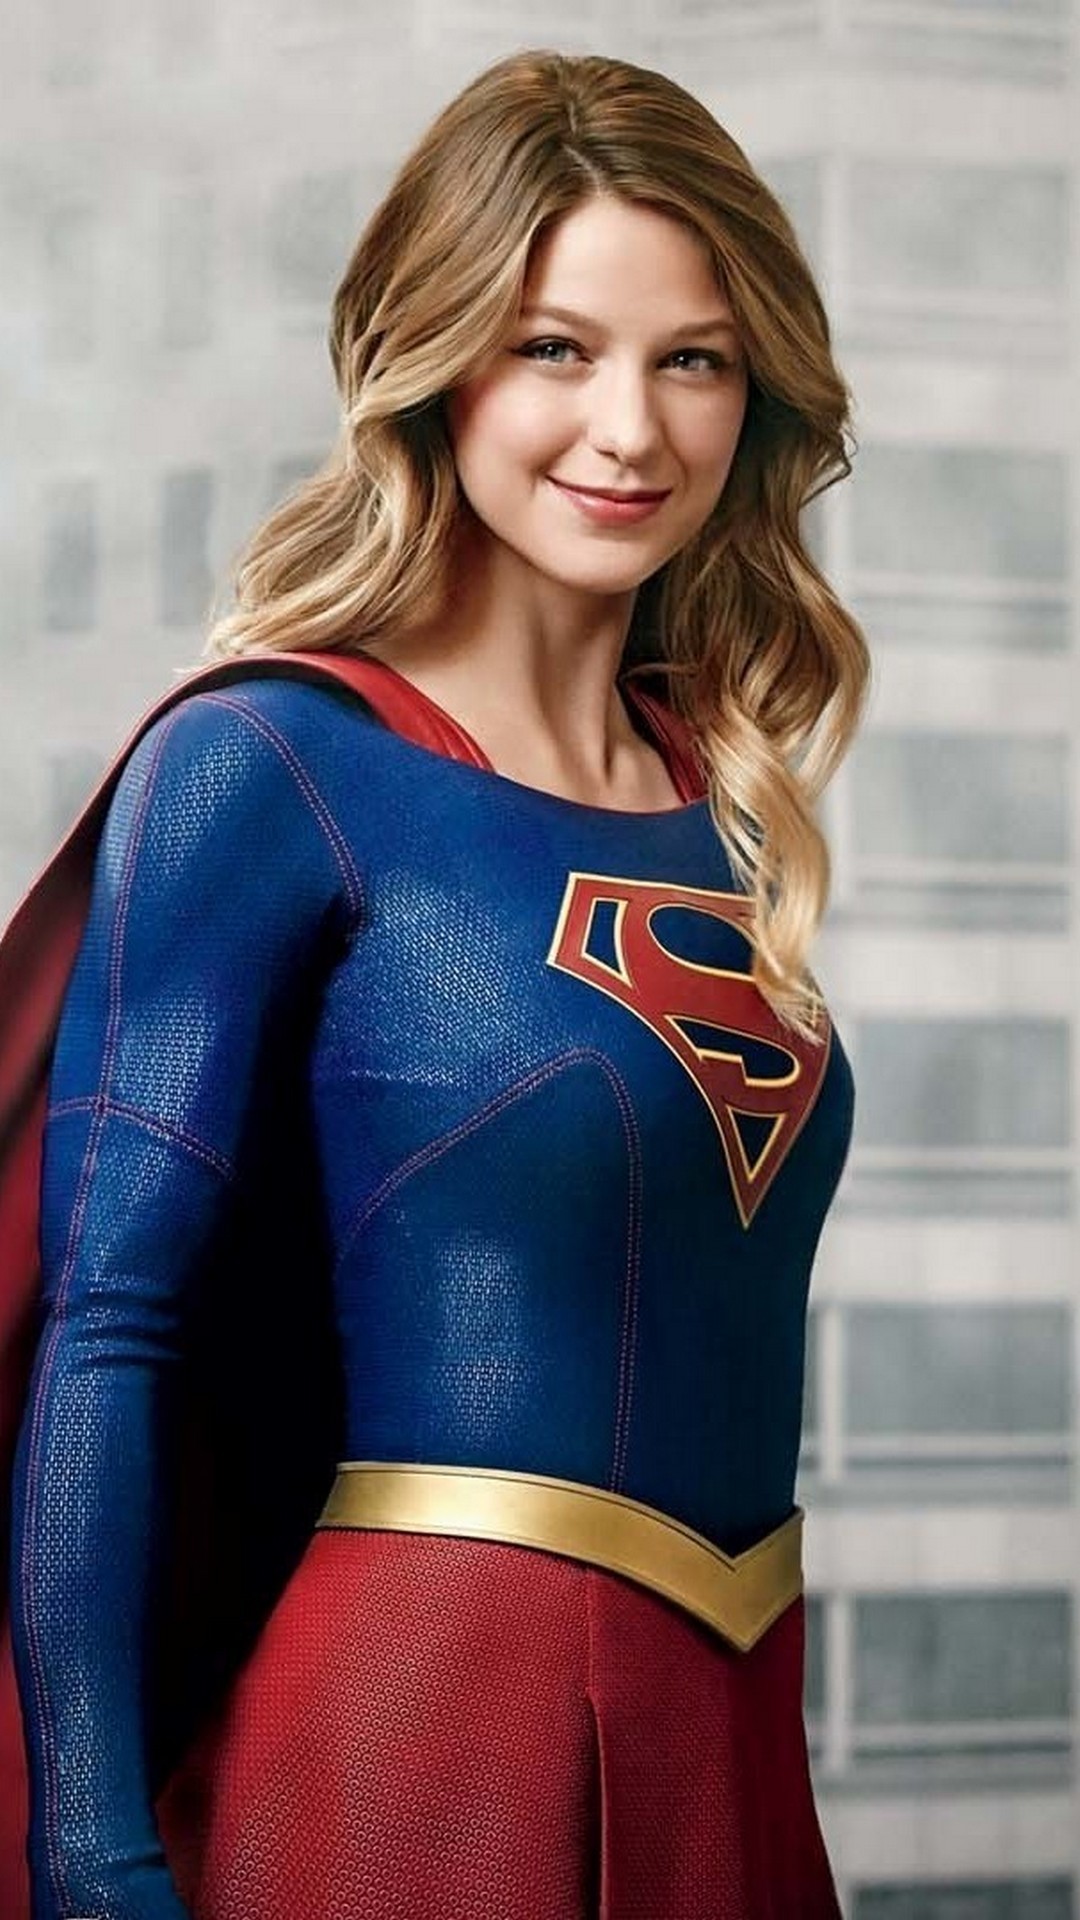 Supergirl iPhone Wallpaper With high-resolution 1080X1920 pixel. You can use this wallpaper for your iPhone 5, 6, 7, 8, X, XS, XR backgrounds, Mobile Screensaver, or iPad Lock Screen